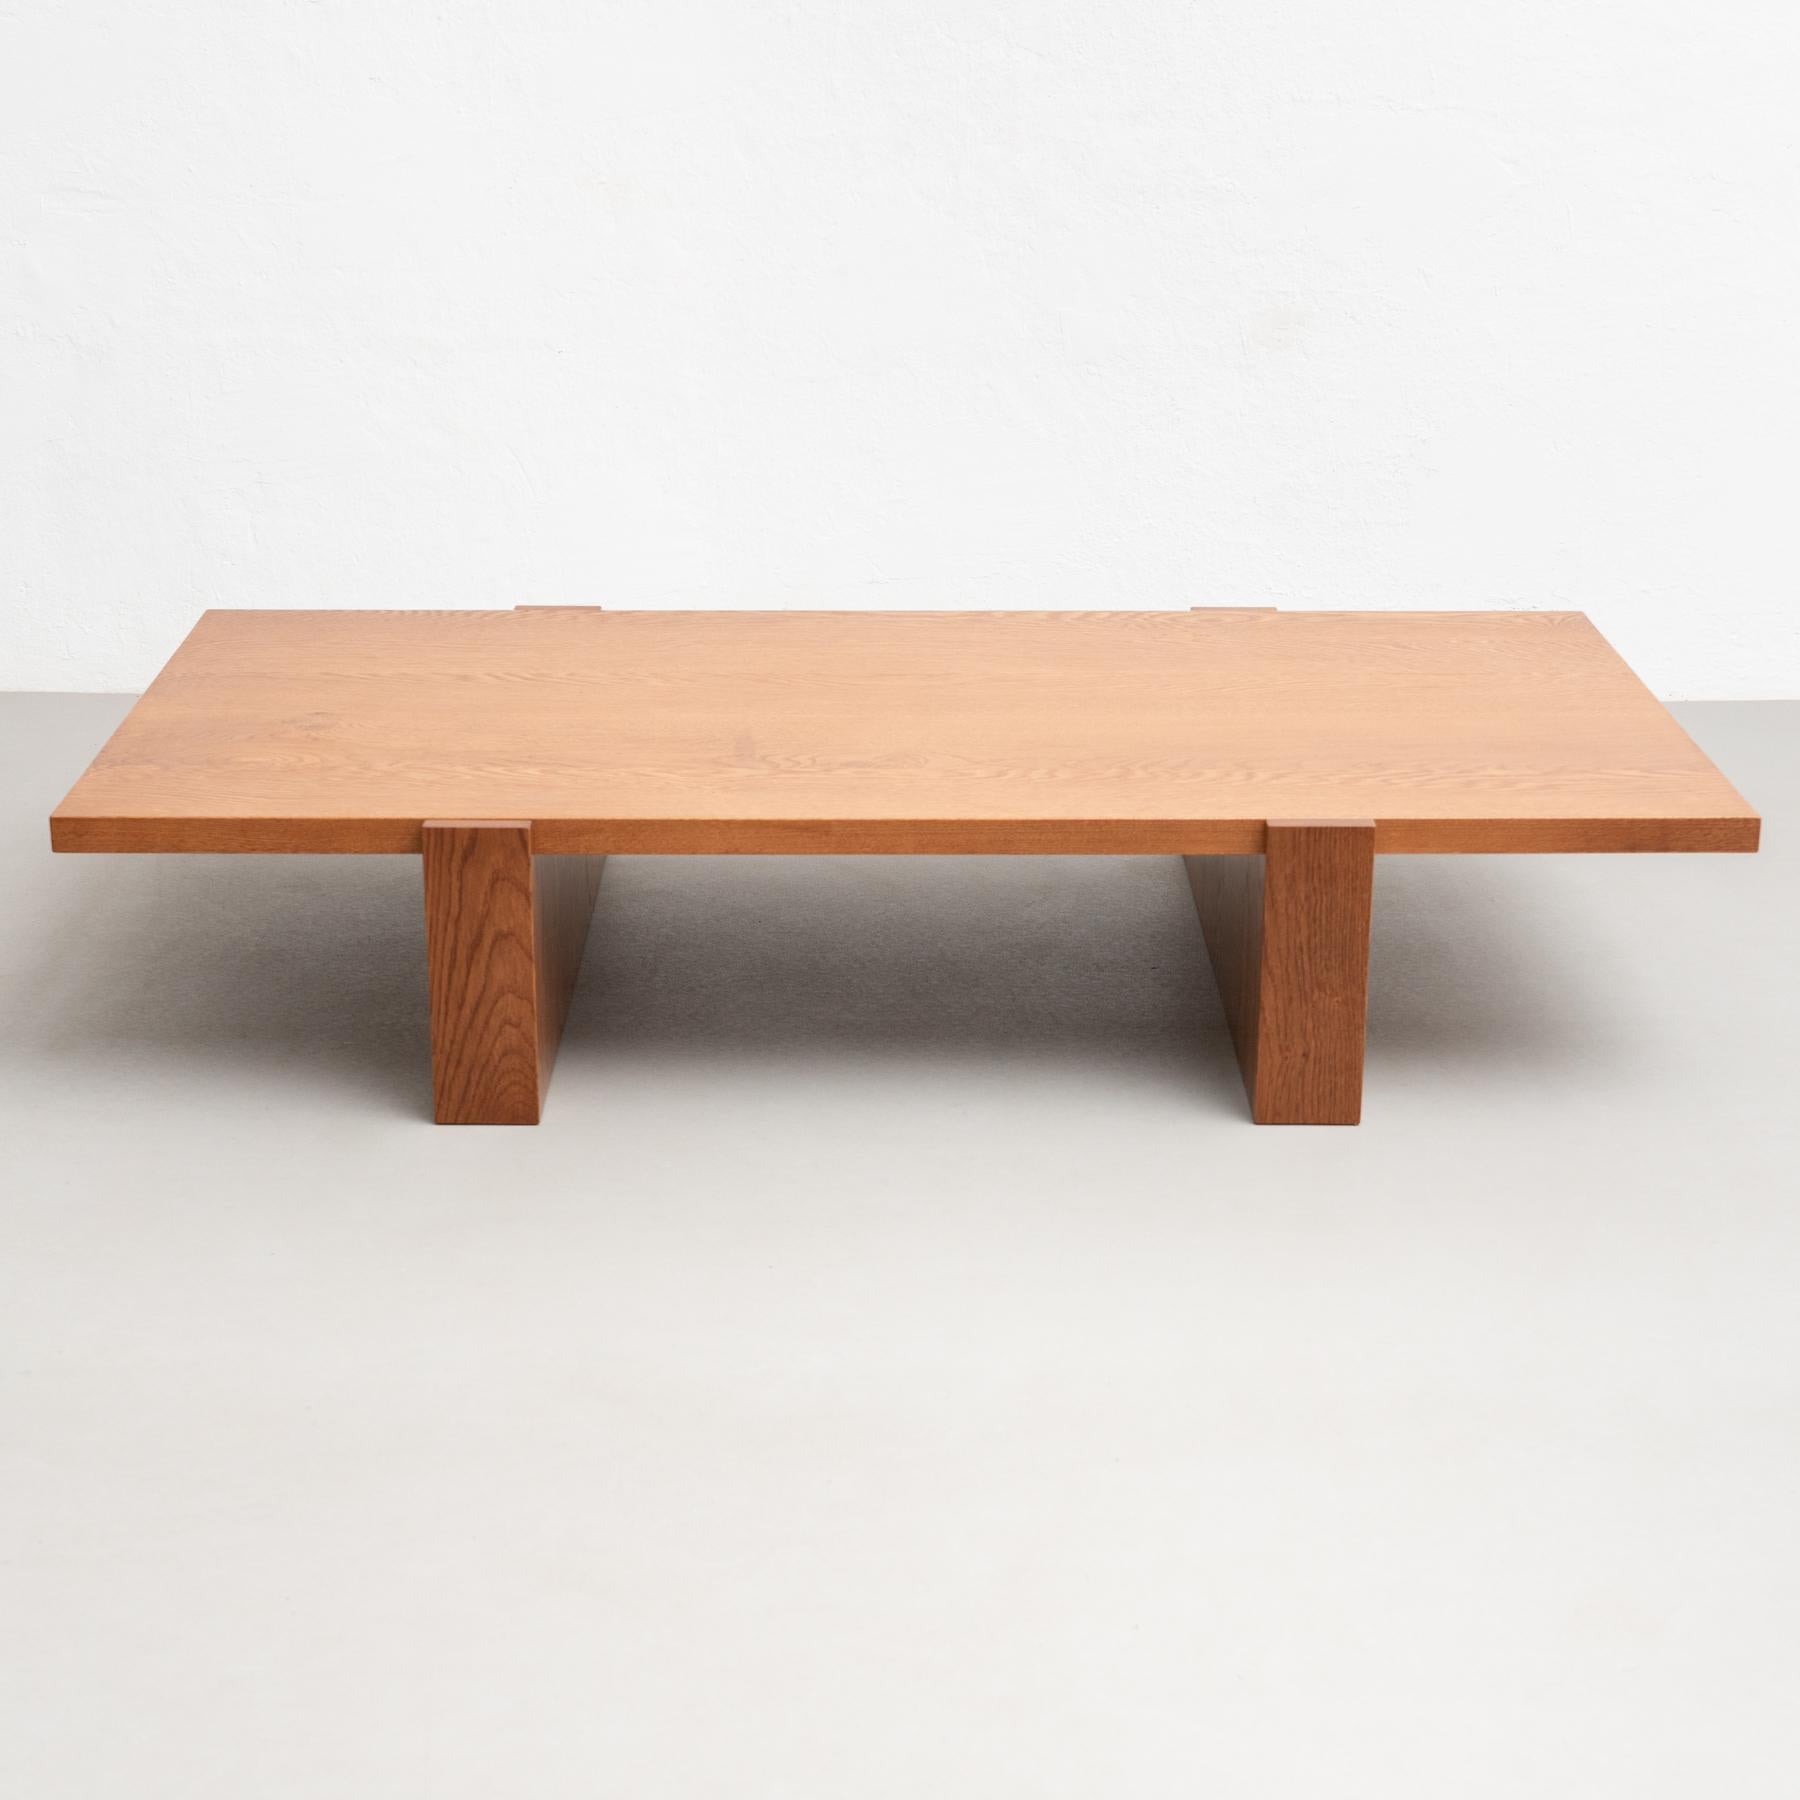 Spanish Dada Est. Contemporary Solid Oak Low Table For Sale